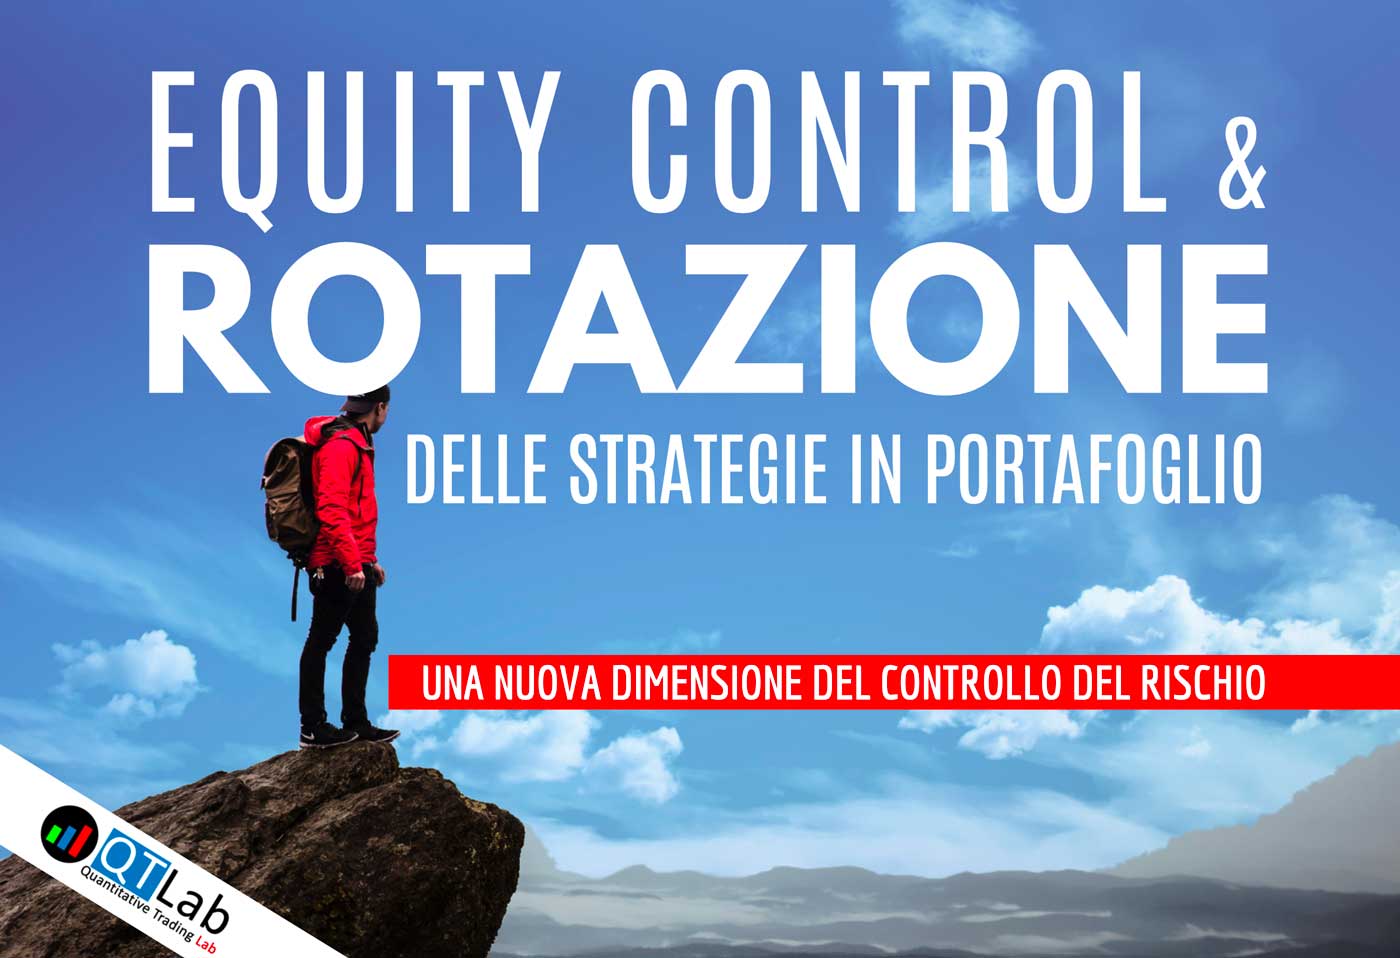 qtlab equity control: miglior corso trading system and methods, online trading system e come costruire trading system automatico